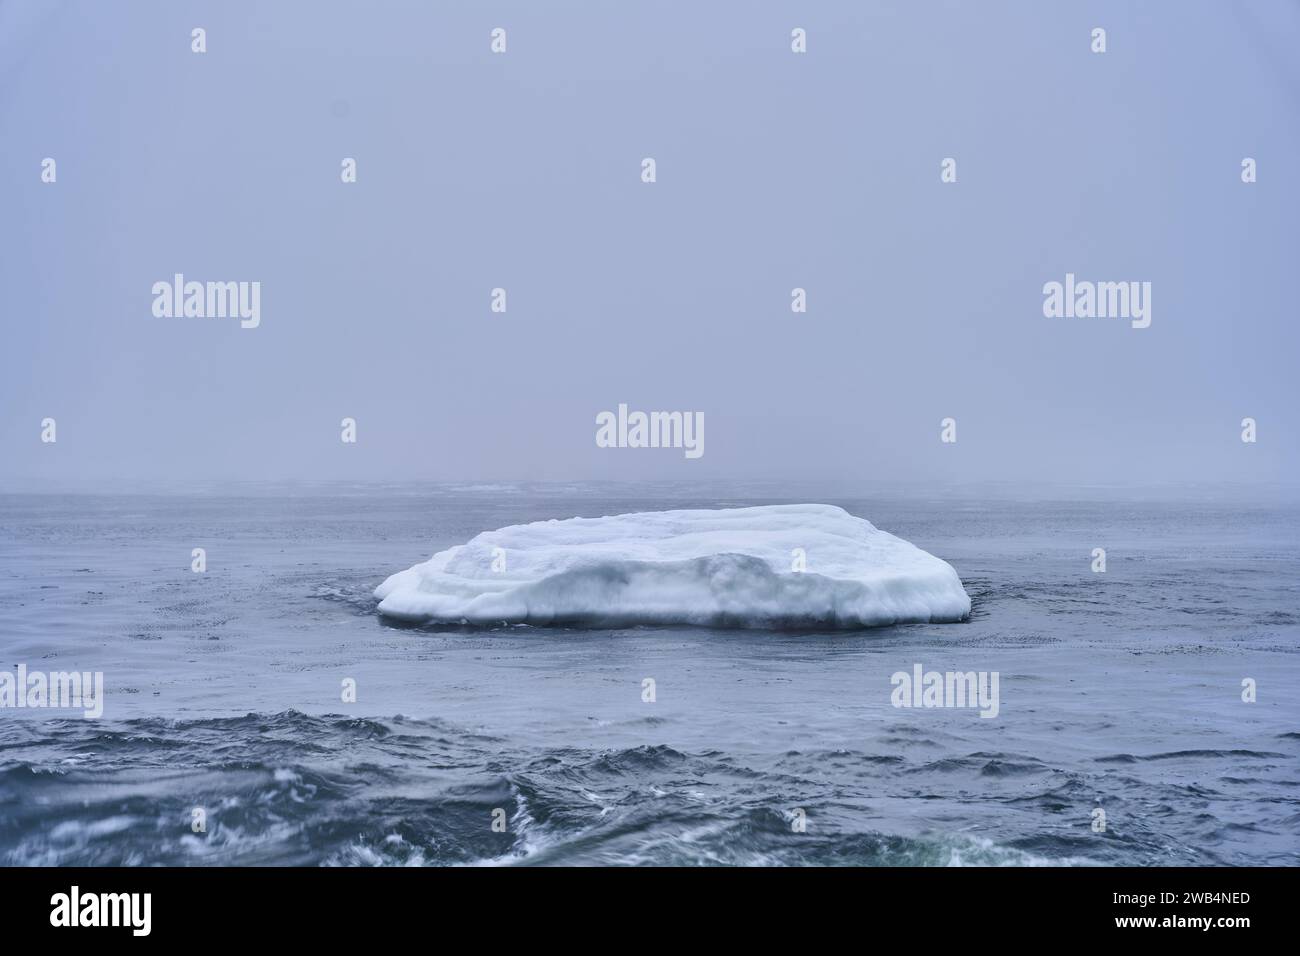 A majestic iceberg floats peacefully in a tranquil ocean shrouded in a mysterious fog Stock Photo